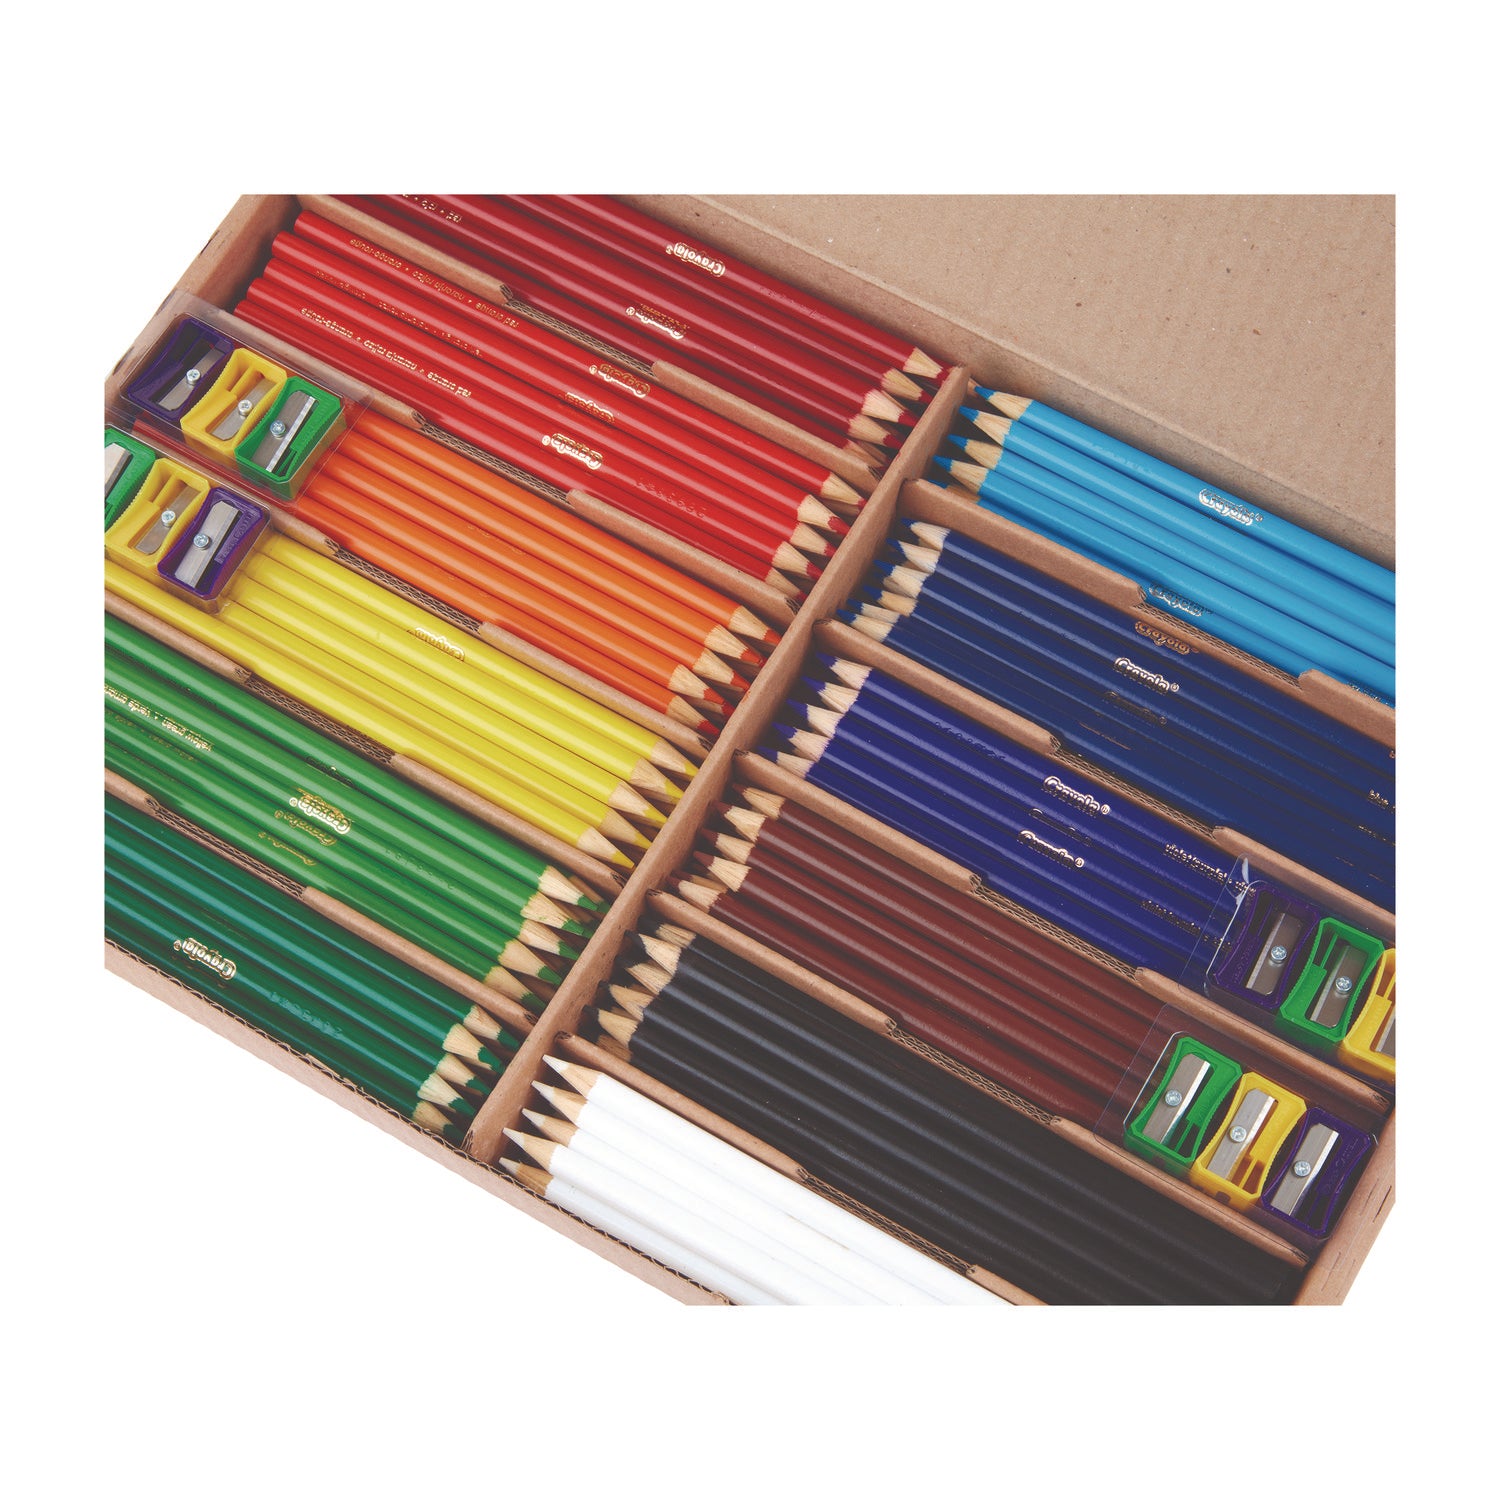 color-pencil-classpack-set-with-240-pencils-and-12-pencil-sharpeners-assorted-lead-and-barrel-colors-240-pack_cyo687506 - 7